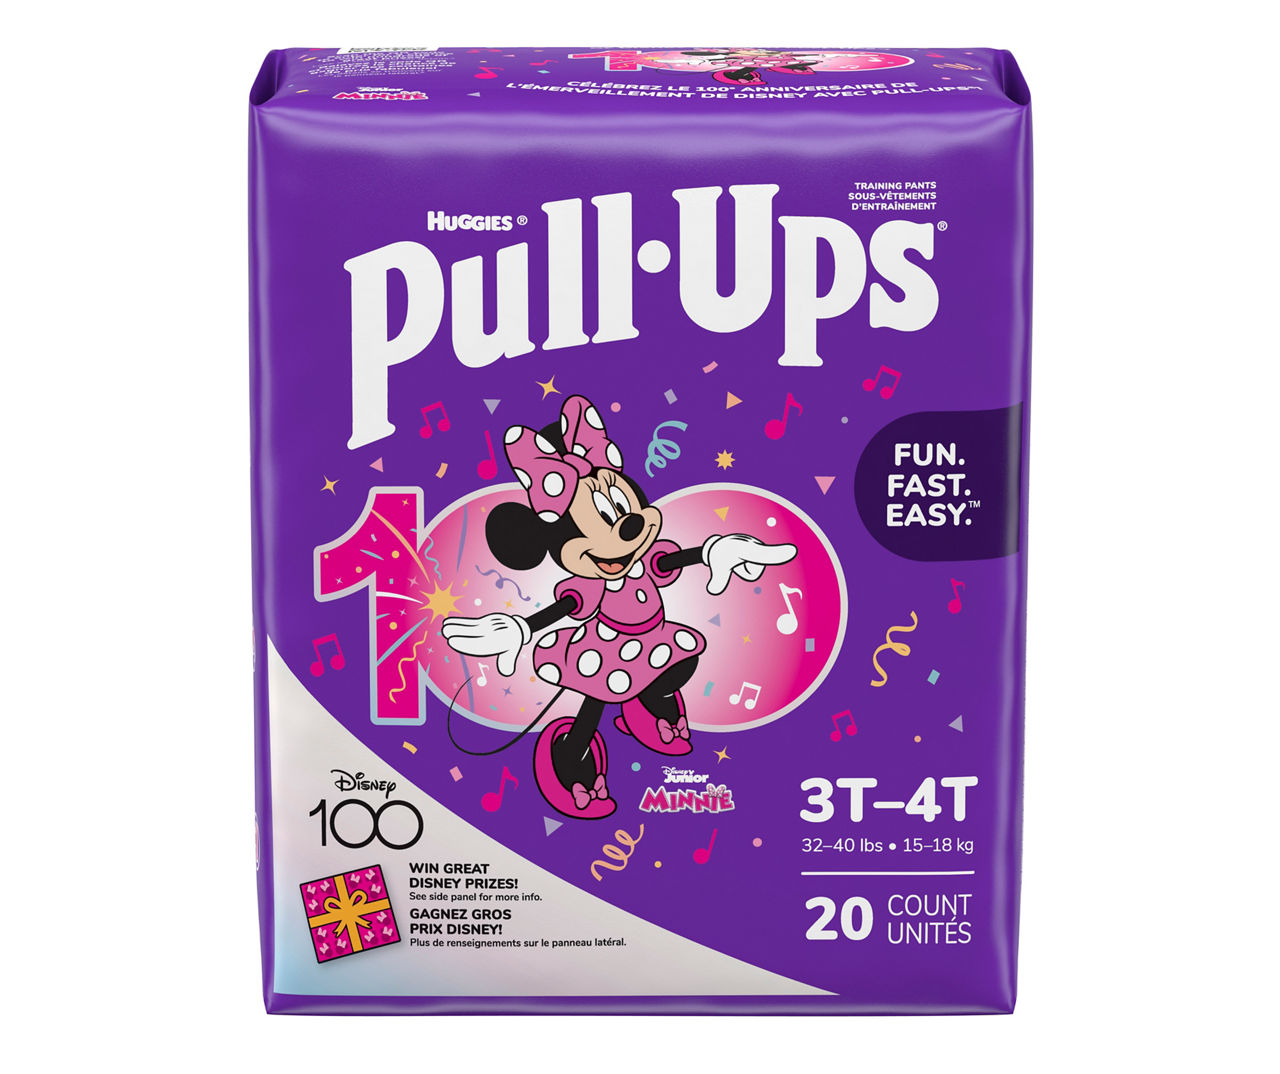 Huggies Size 3T-4T Pull-Ups Potty Training Pants for Girls, 20-Count